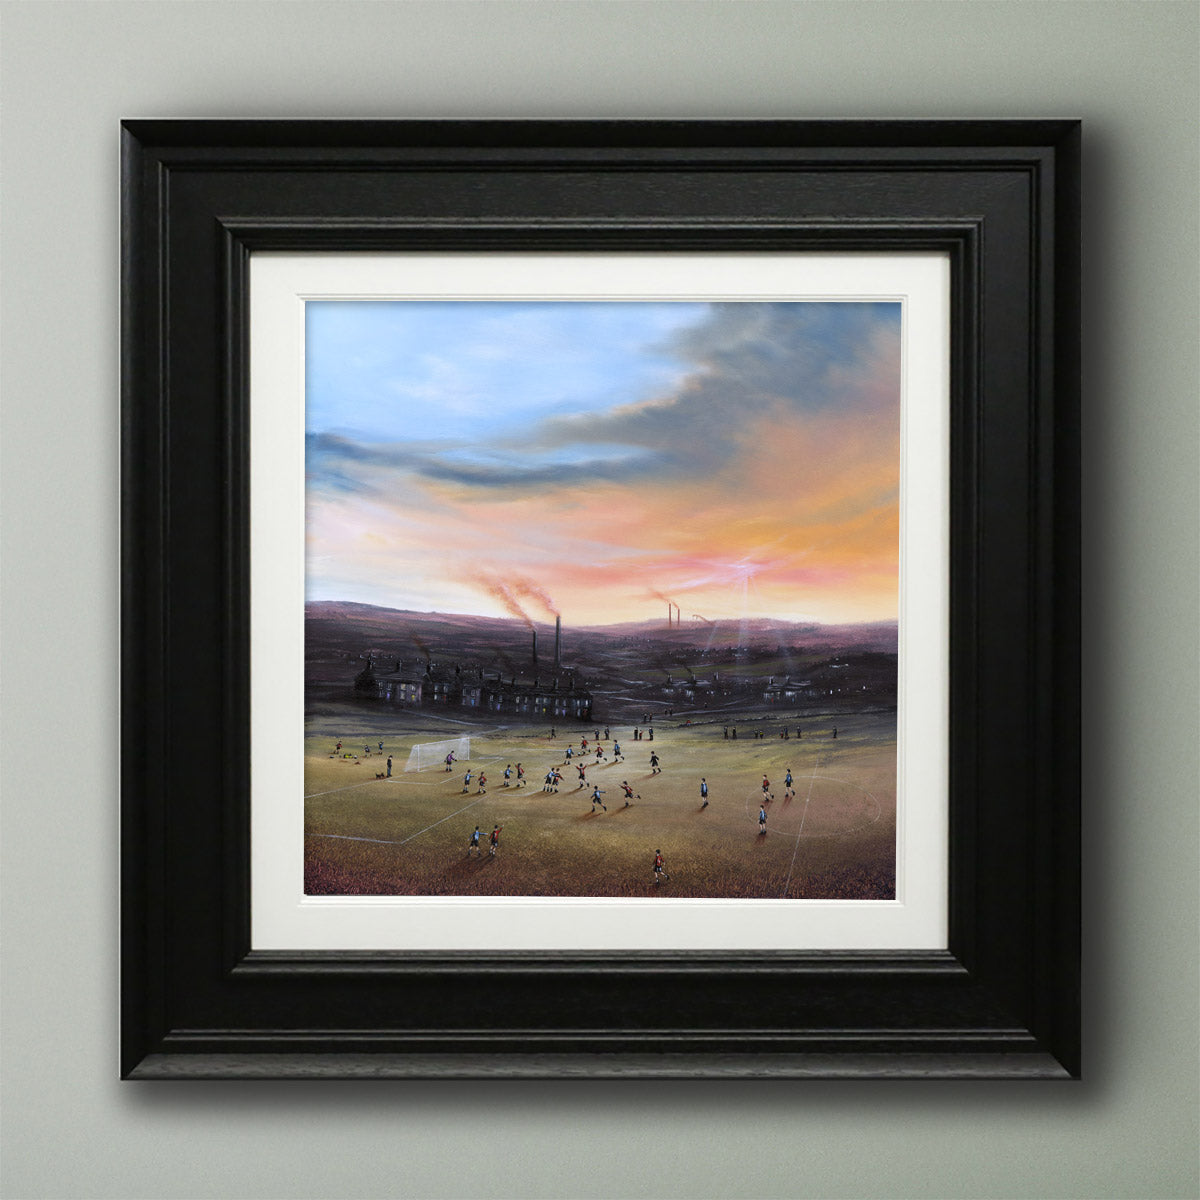 Danny Abrahams - 'Battle For The Bragging Rights' - Framed Limited Edition Art